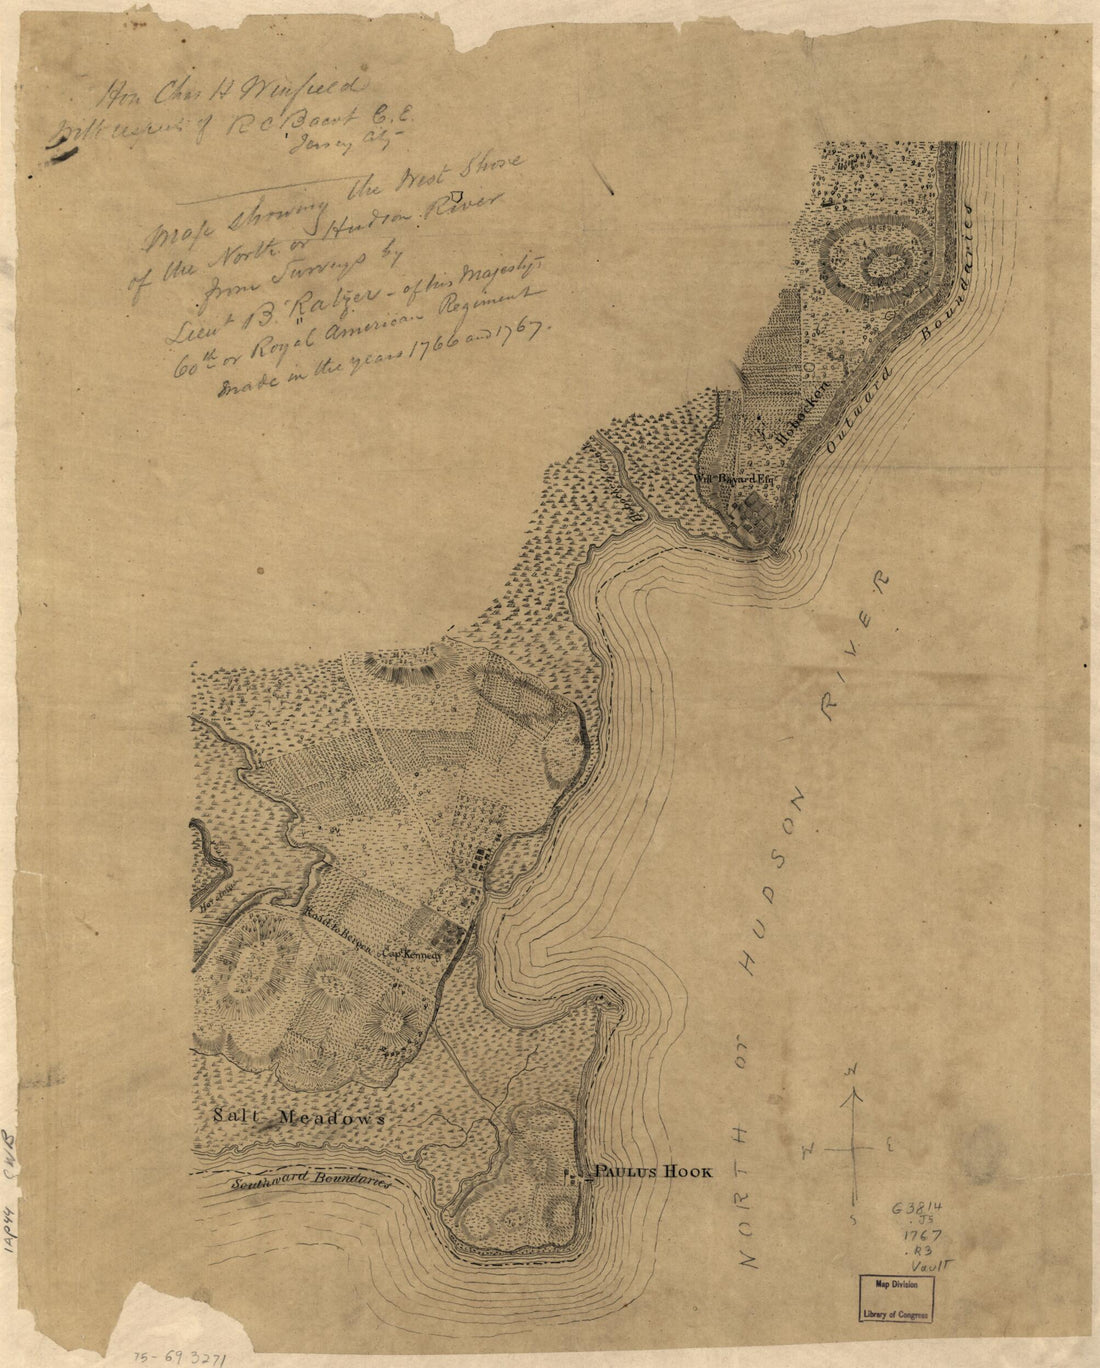 This old map of Map Showing the West Shore of the North Or Hudson River from 1767 was created by R. C. Baevt, Bernard Ratzer in 1767